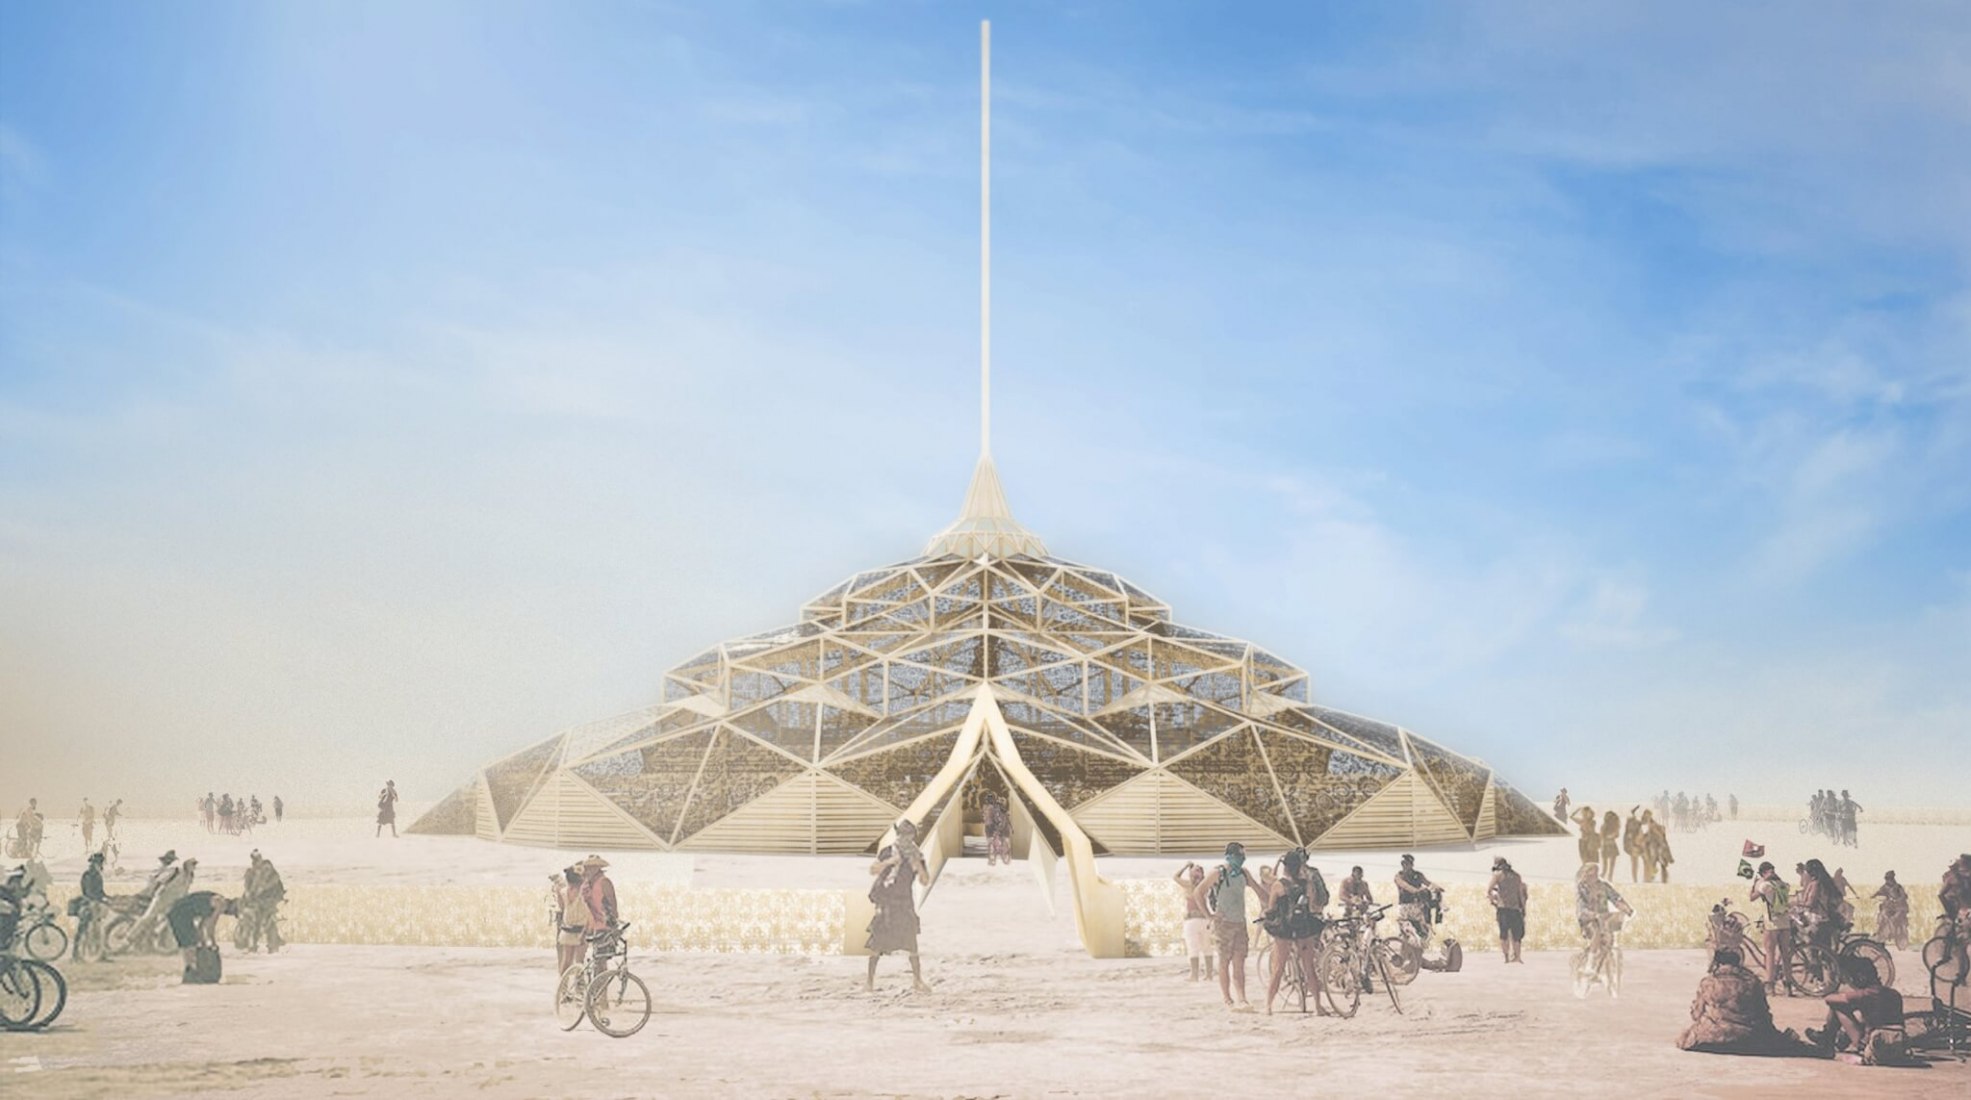 Burning Man Temple 2023 will be a giant desert flower, "Temple of the